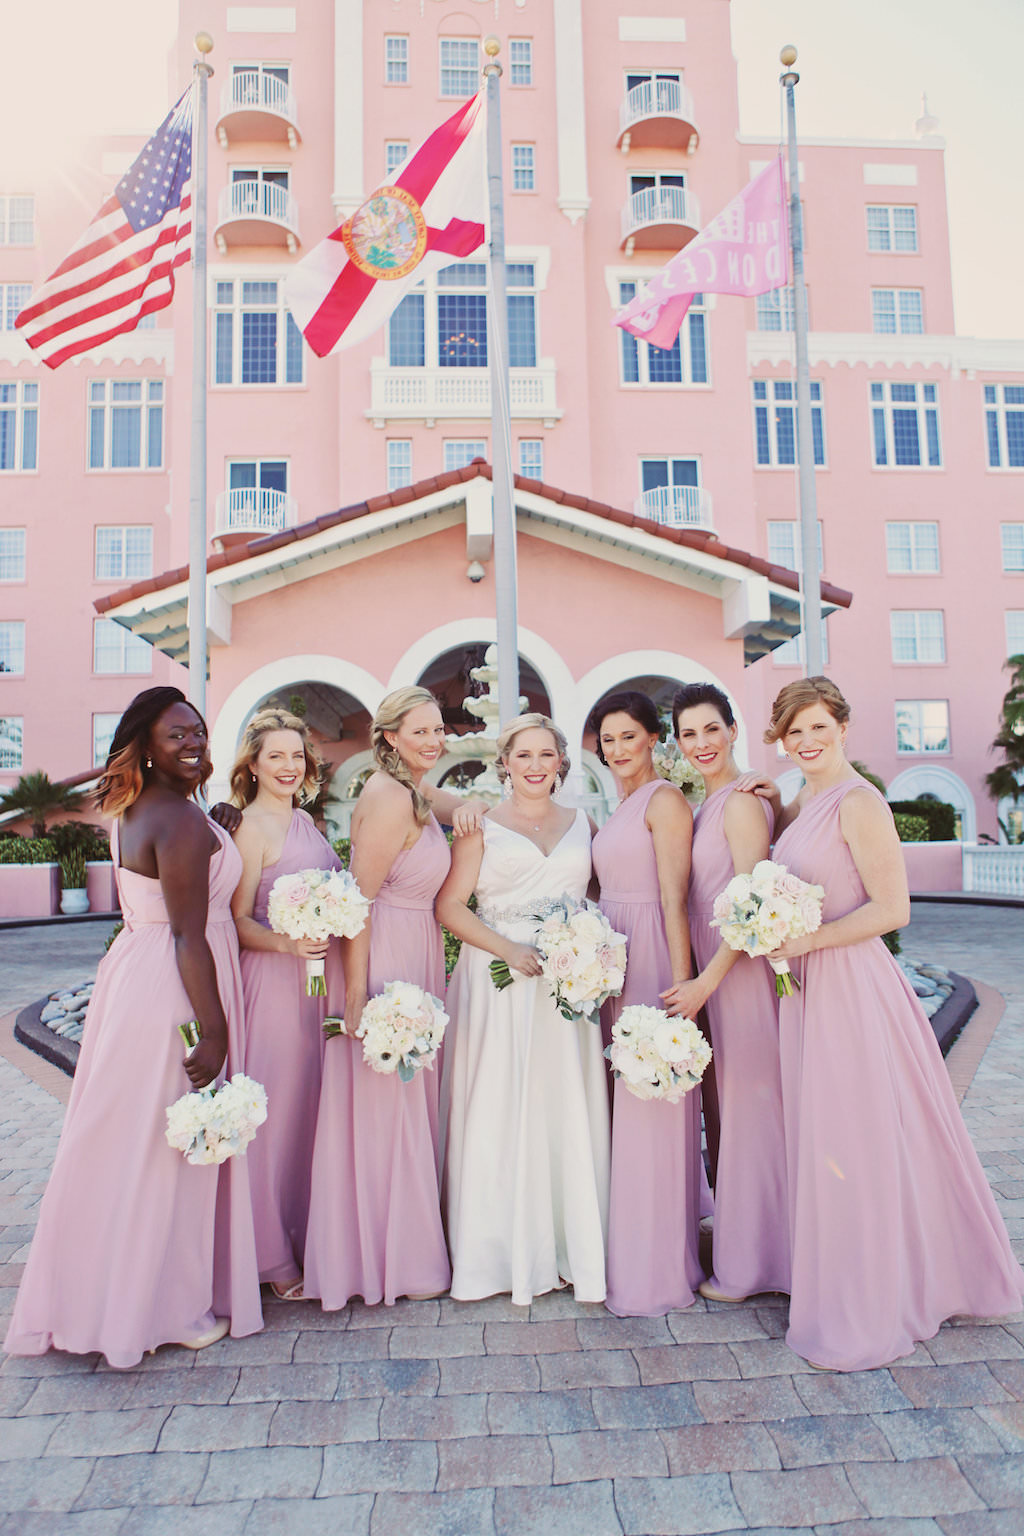 Bridal Party Portrait with Lilac Asymetrical One Shoulder Bridesmaids Dresses and White and Blush Bouquets | Tampa Bay Wedding Venue The Don CeSar